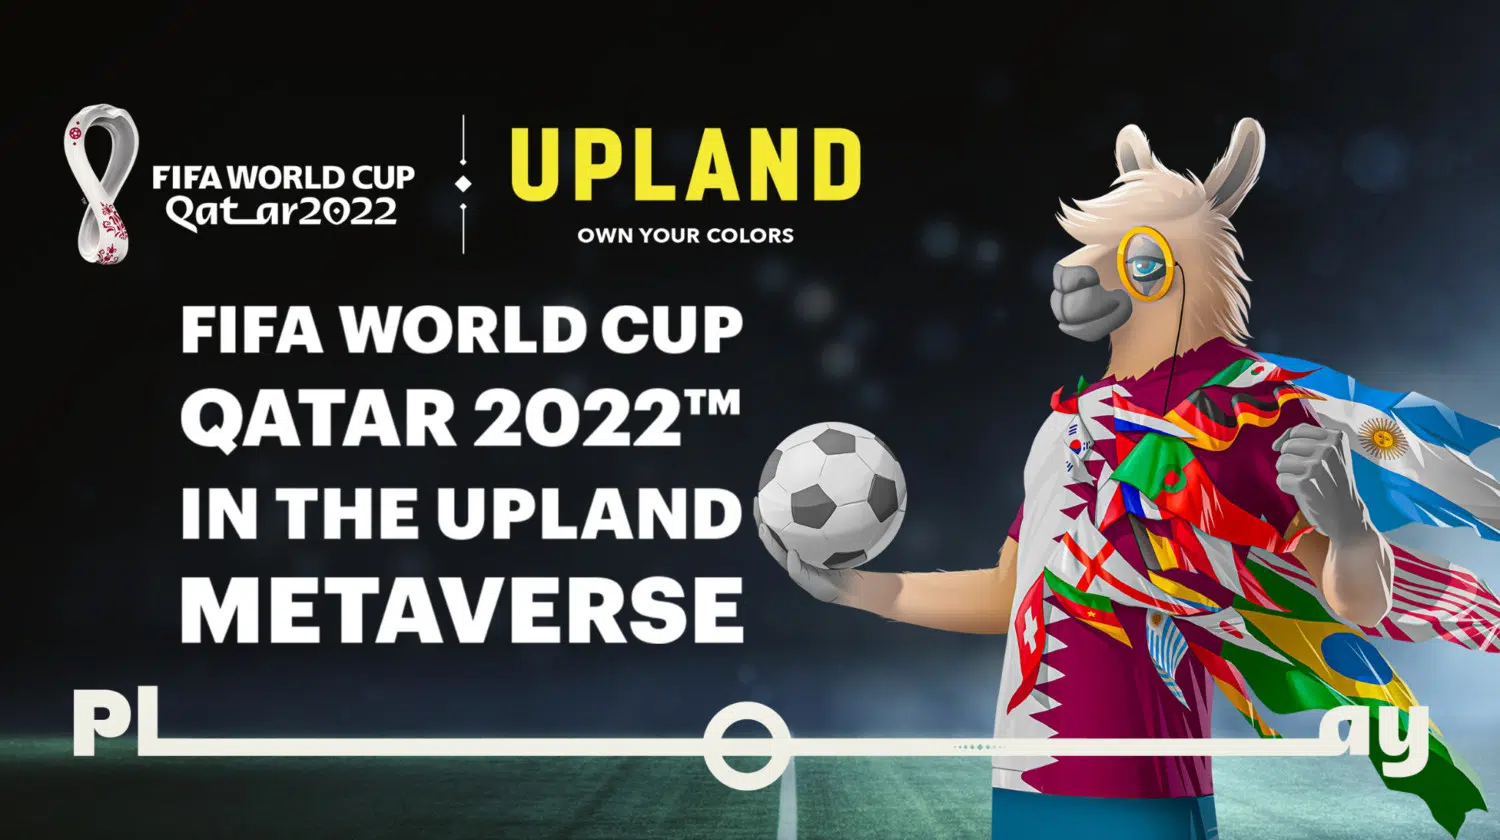 Upland and FIFA Metaverse and NFTs World Cup 2022 experience 